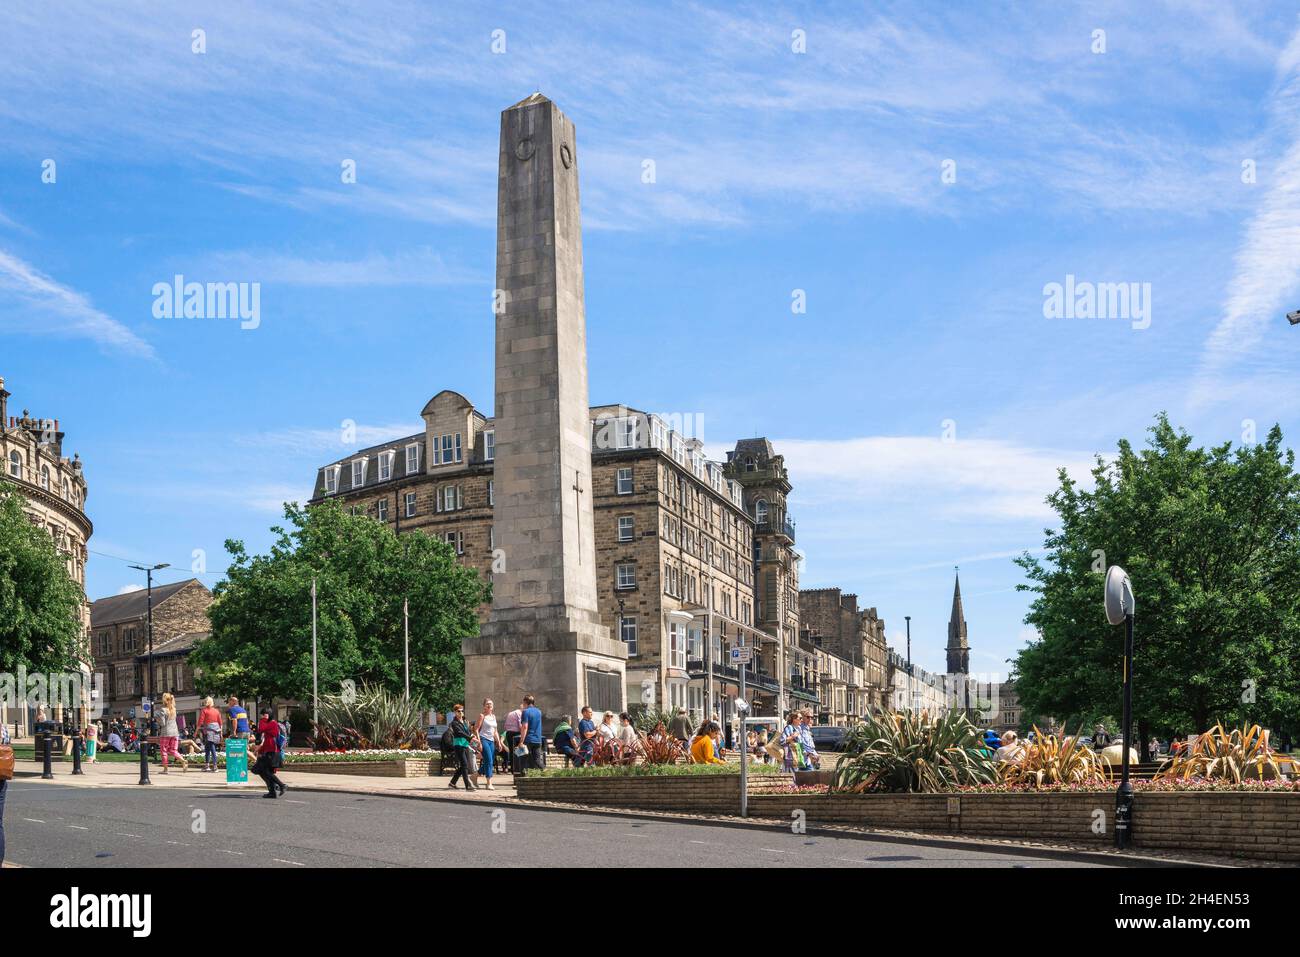 Cenotaph Harrogate, view in summer of the Cenotaph war memorial sited in Cambridge Crescent Gardens in the centre of Harrogate, North Yorkshire, UK Stock Photo